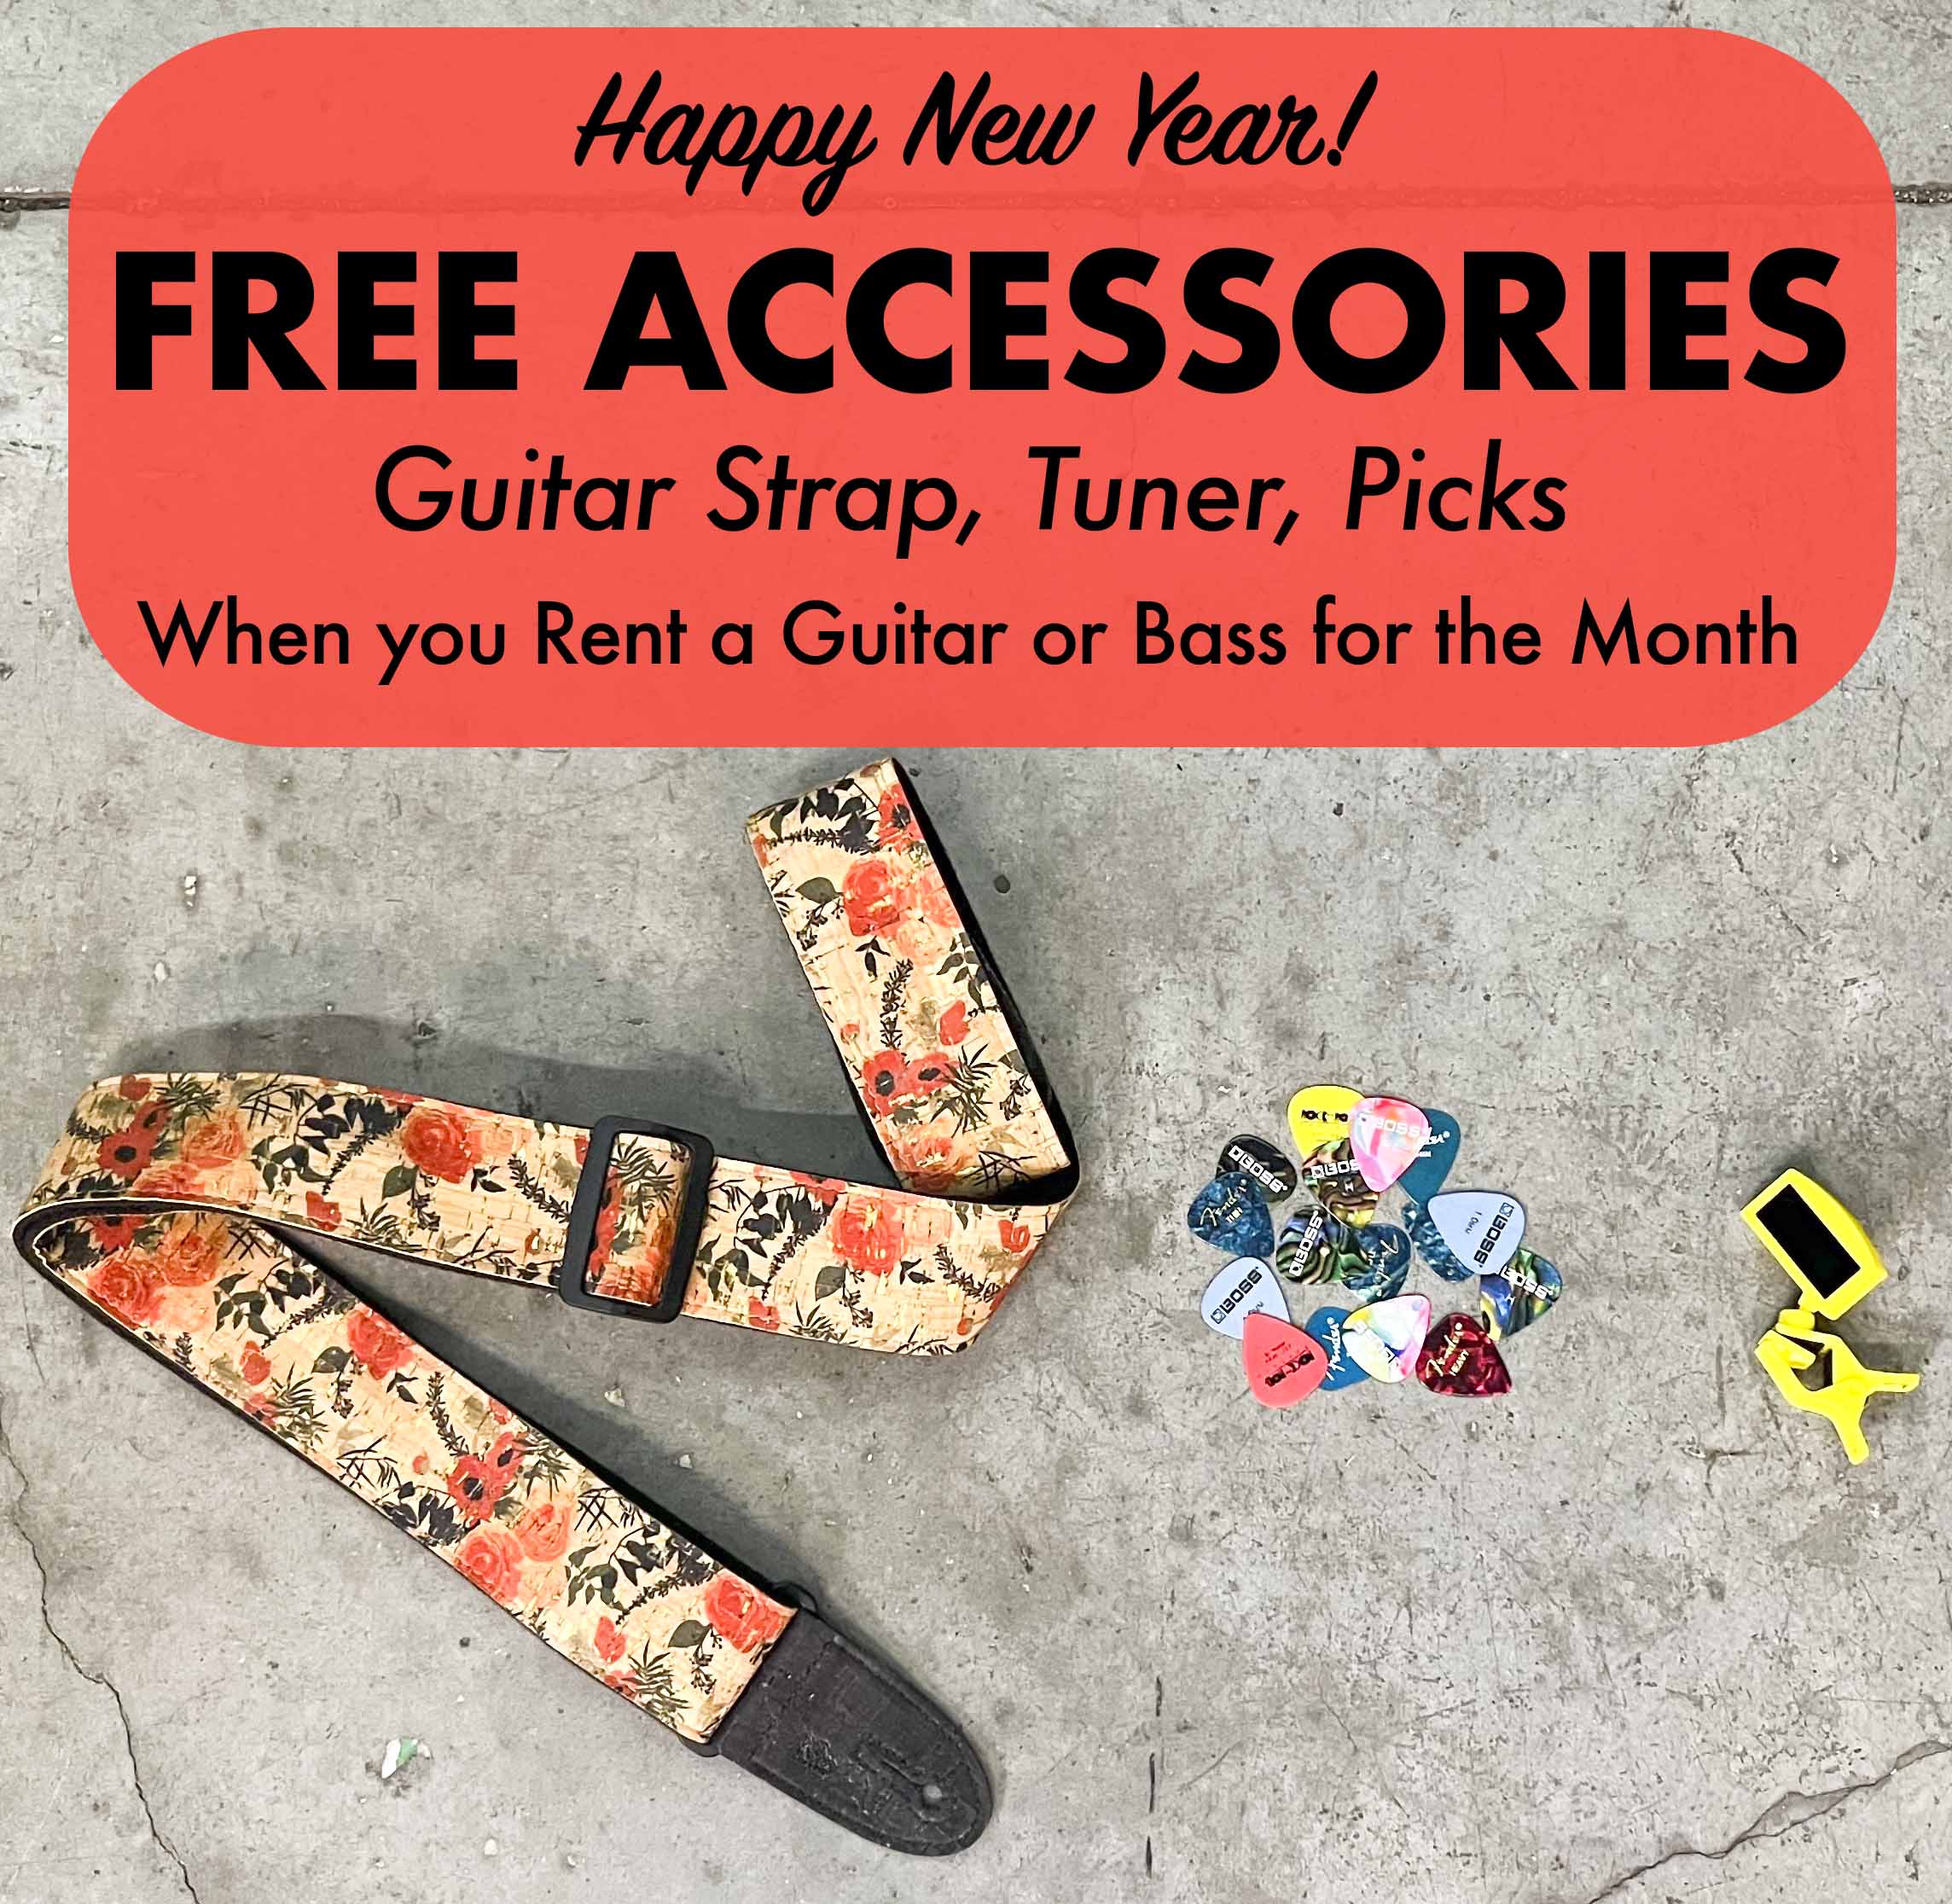 Limited Time Offer - Free Accessories when you Rent Guitars or Basses by the Month